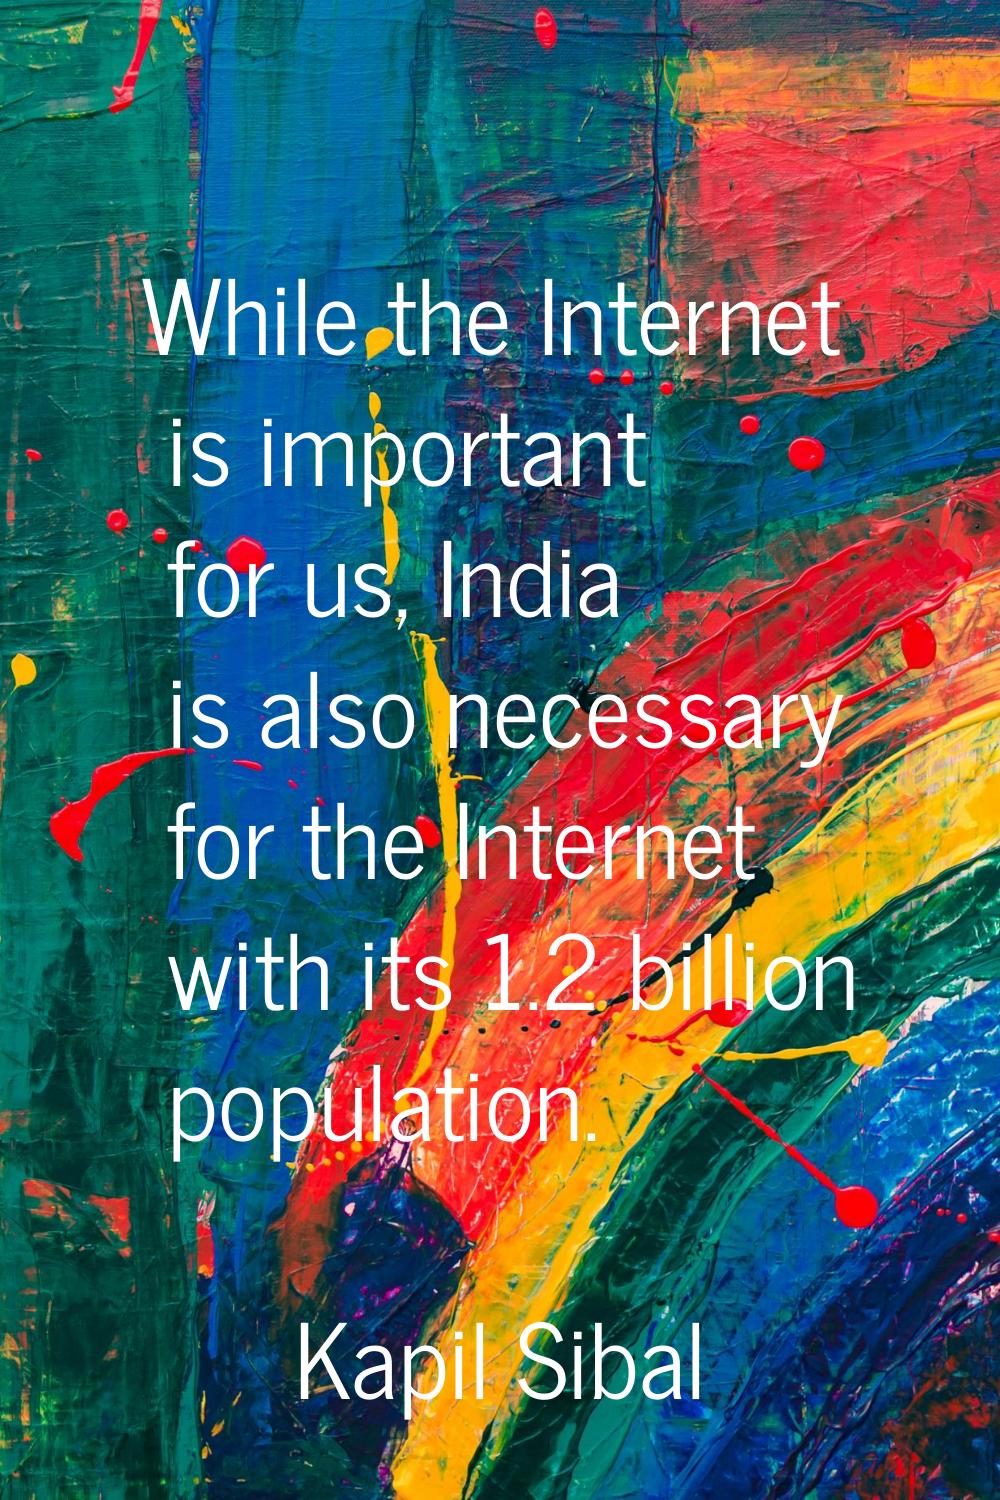 While the Internet is important for us, India is also necessary for the Internet with its 1.2 billi